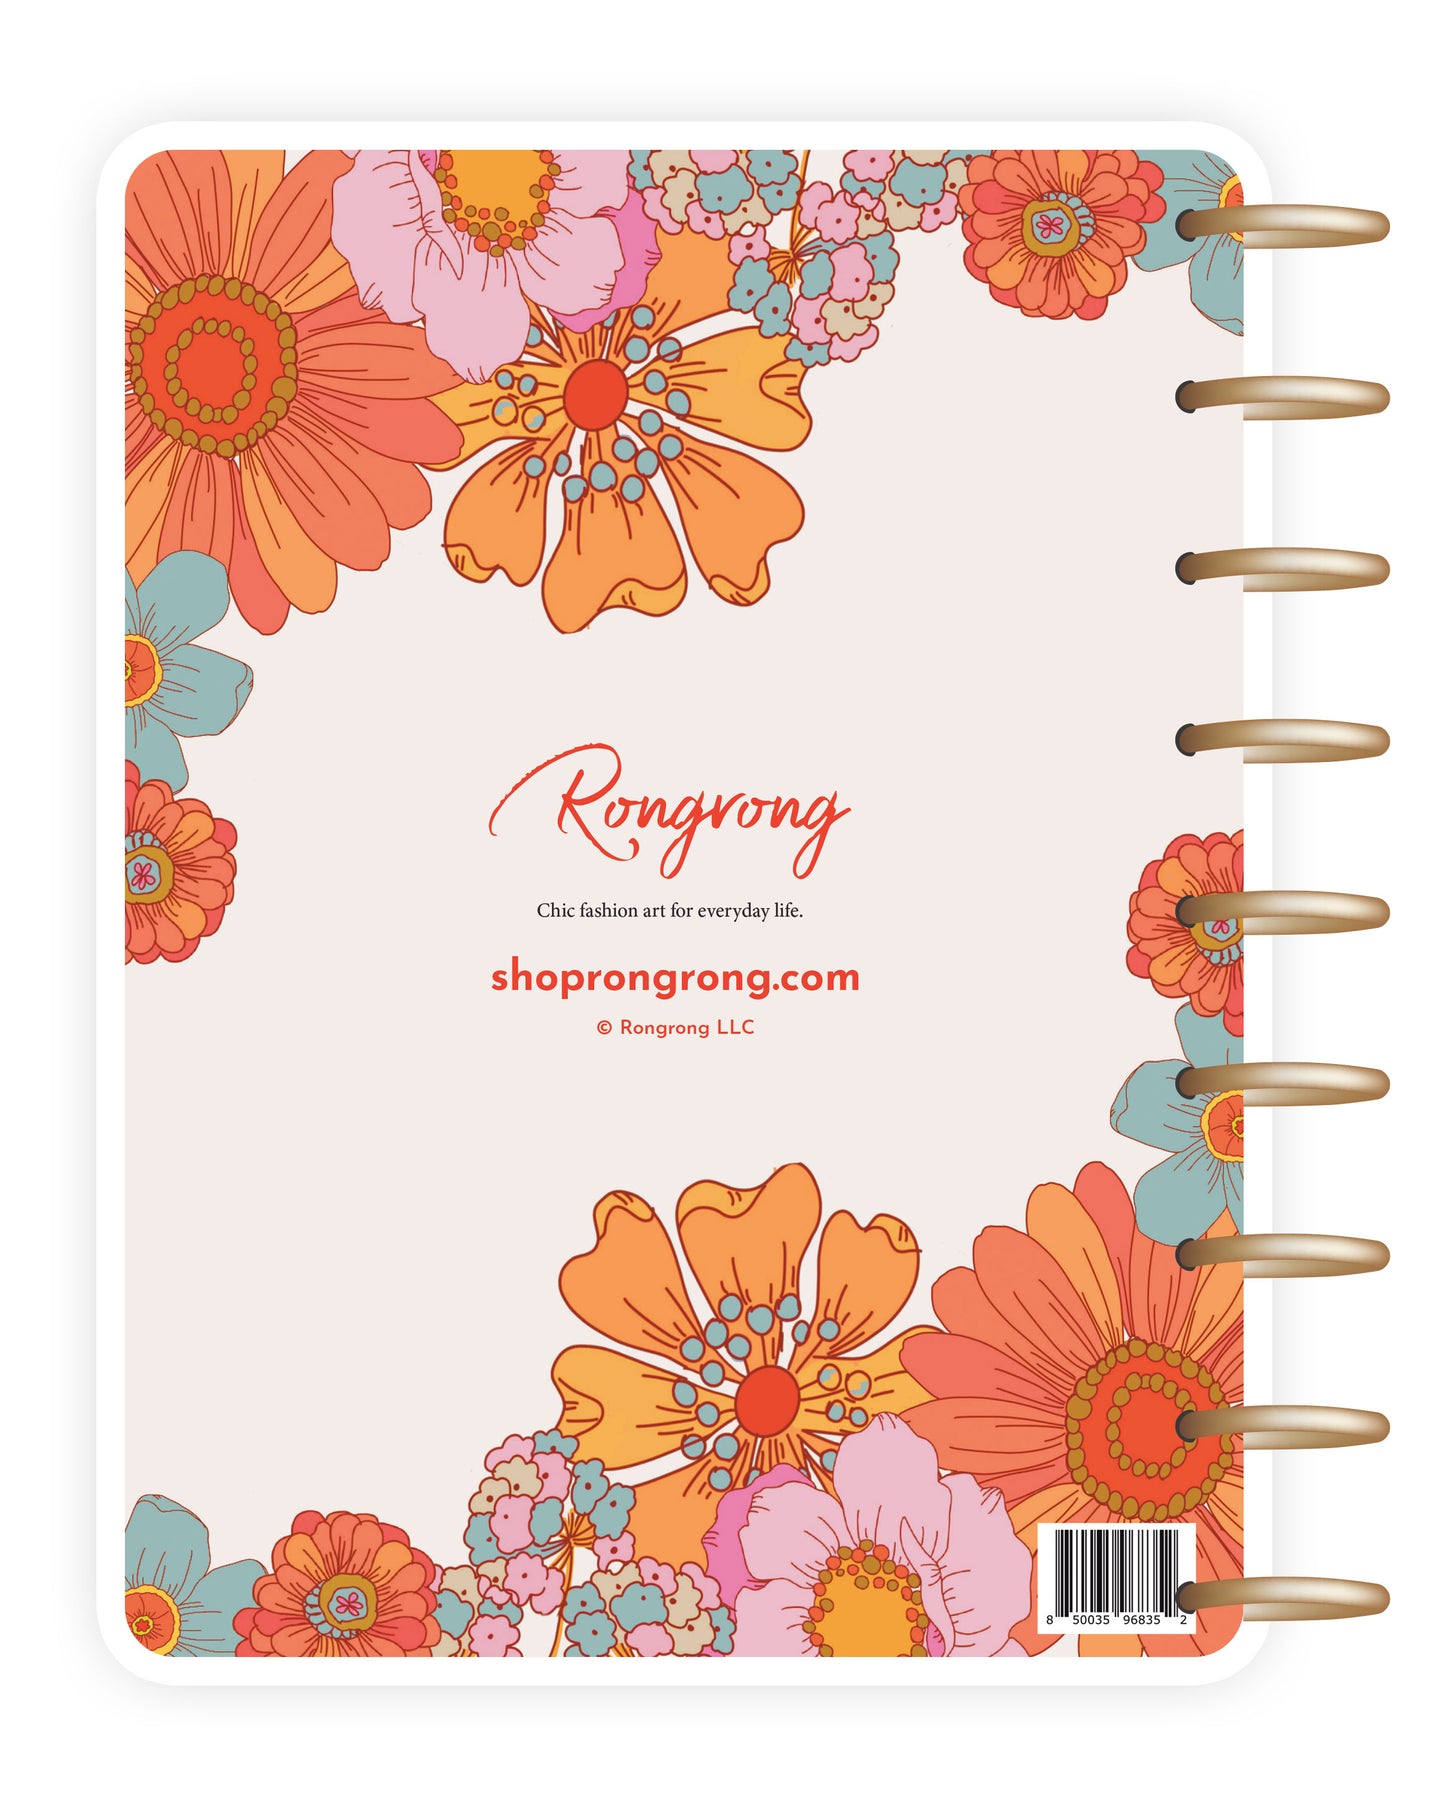 Mom Life Planner Cover (Set of 6)